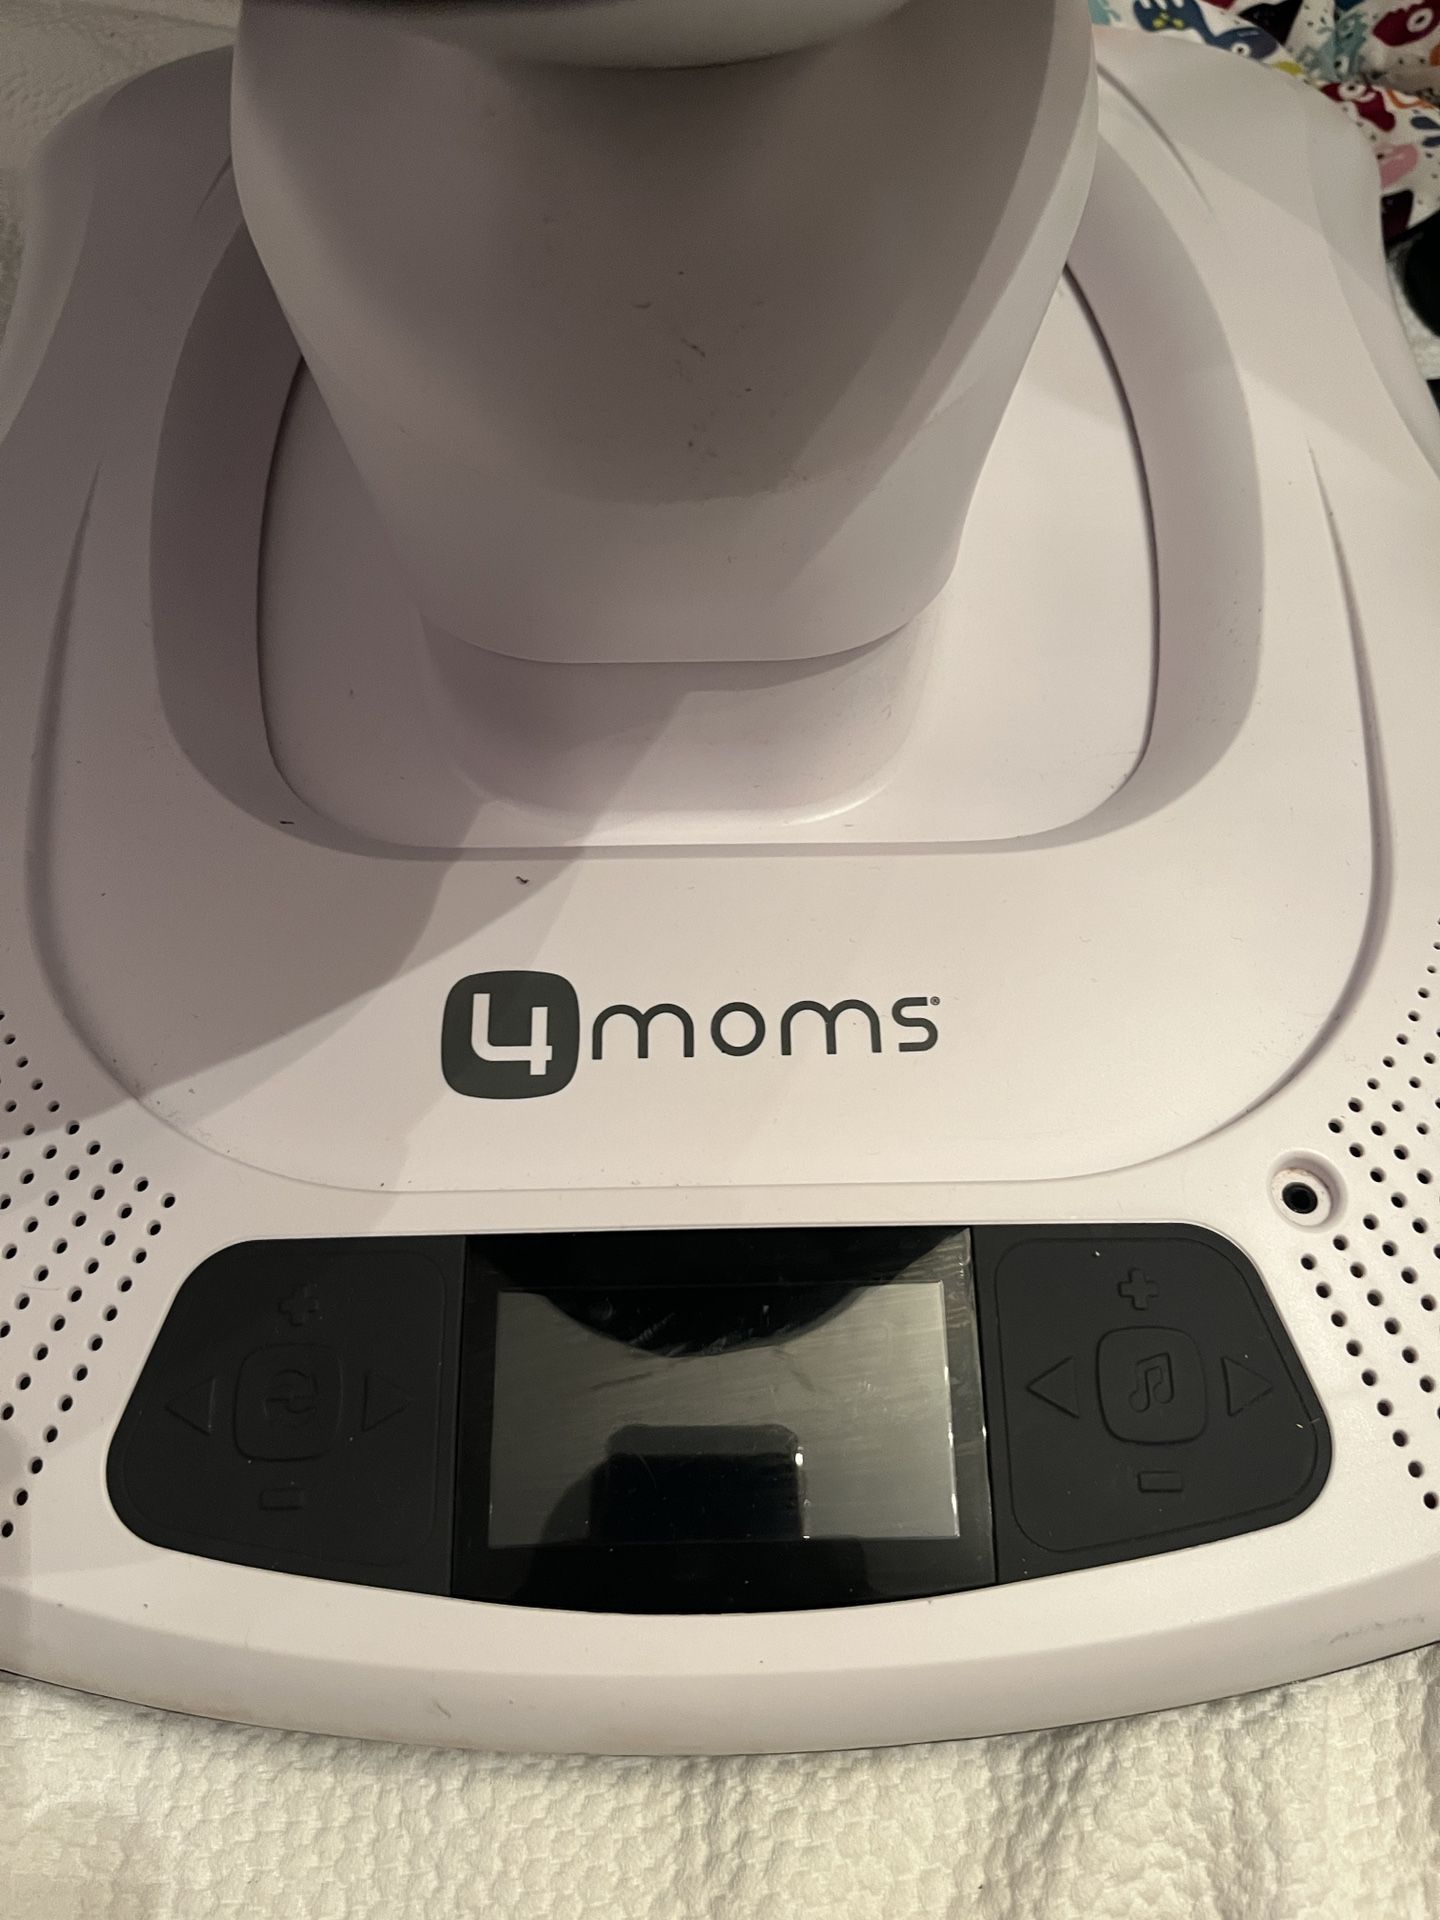 4moms MamaRoo 4 Multi-Motion B aby Swing model By